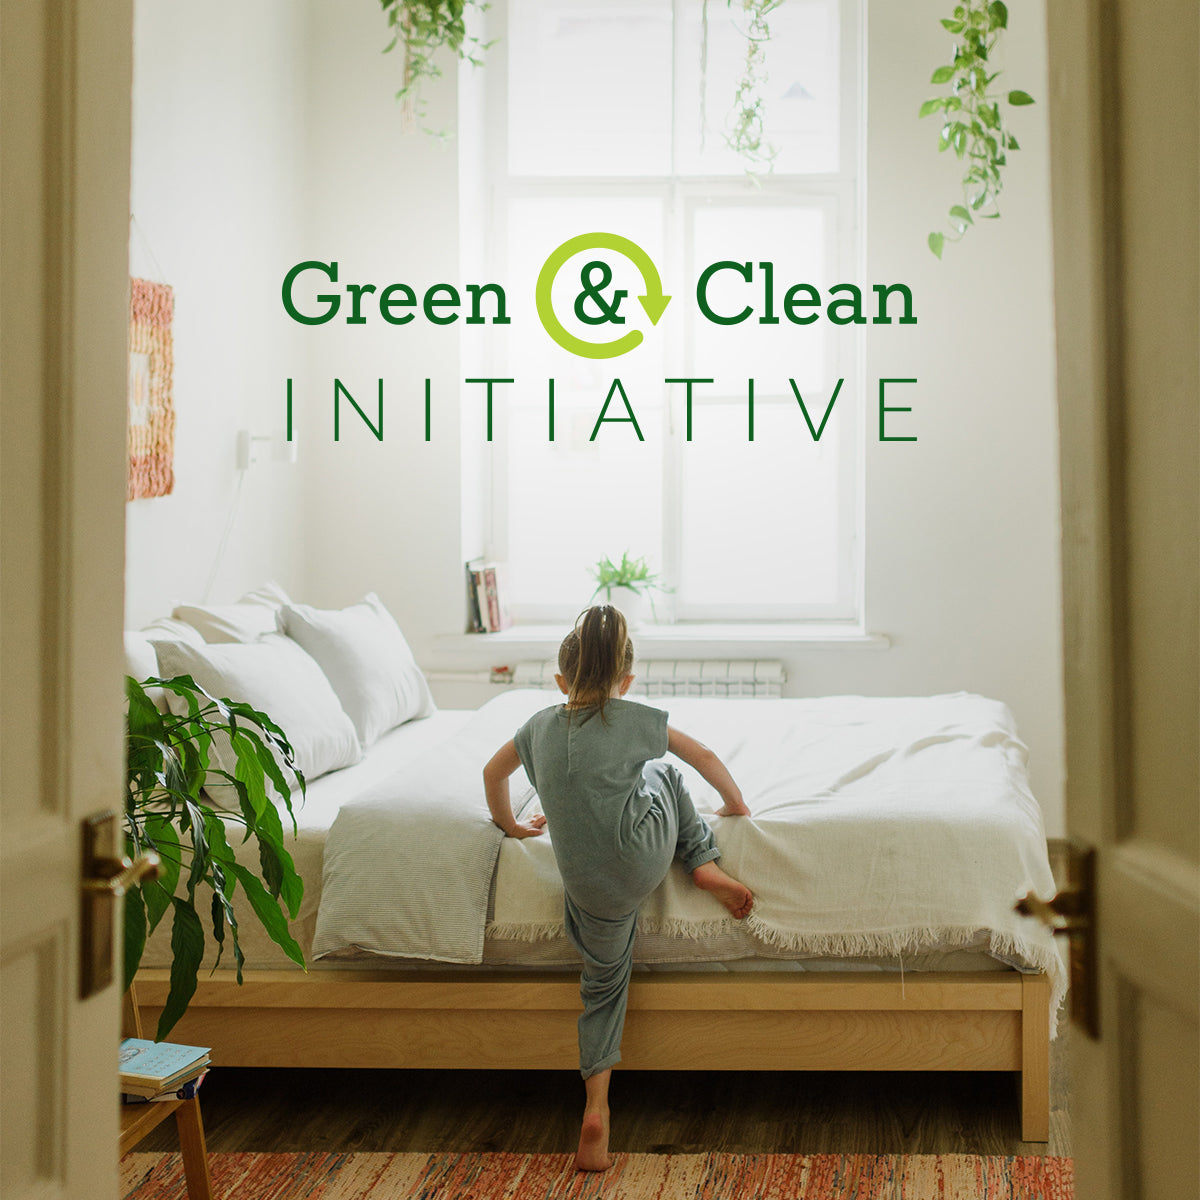 Green & Clean Initiative logo on top of photo of young girl climbing into bed